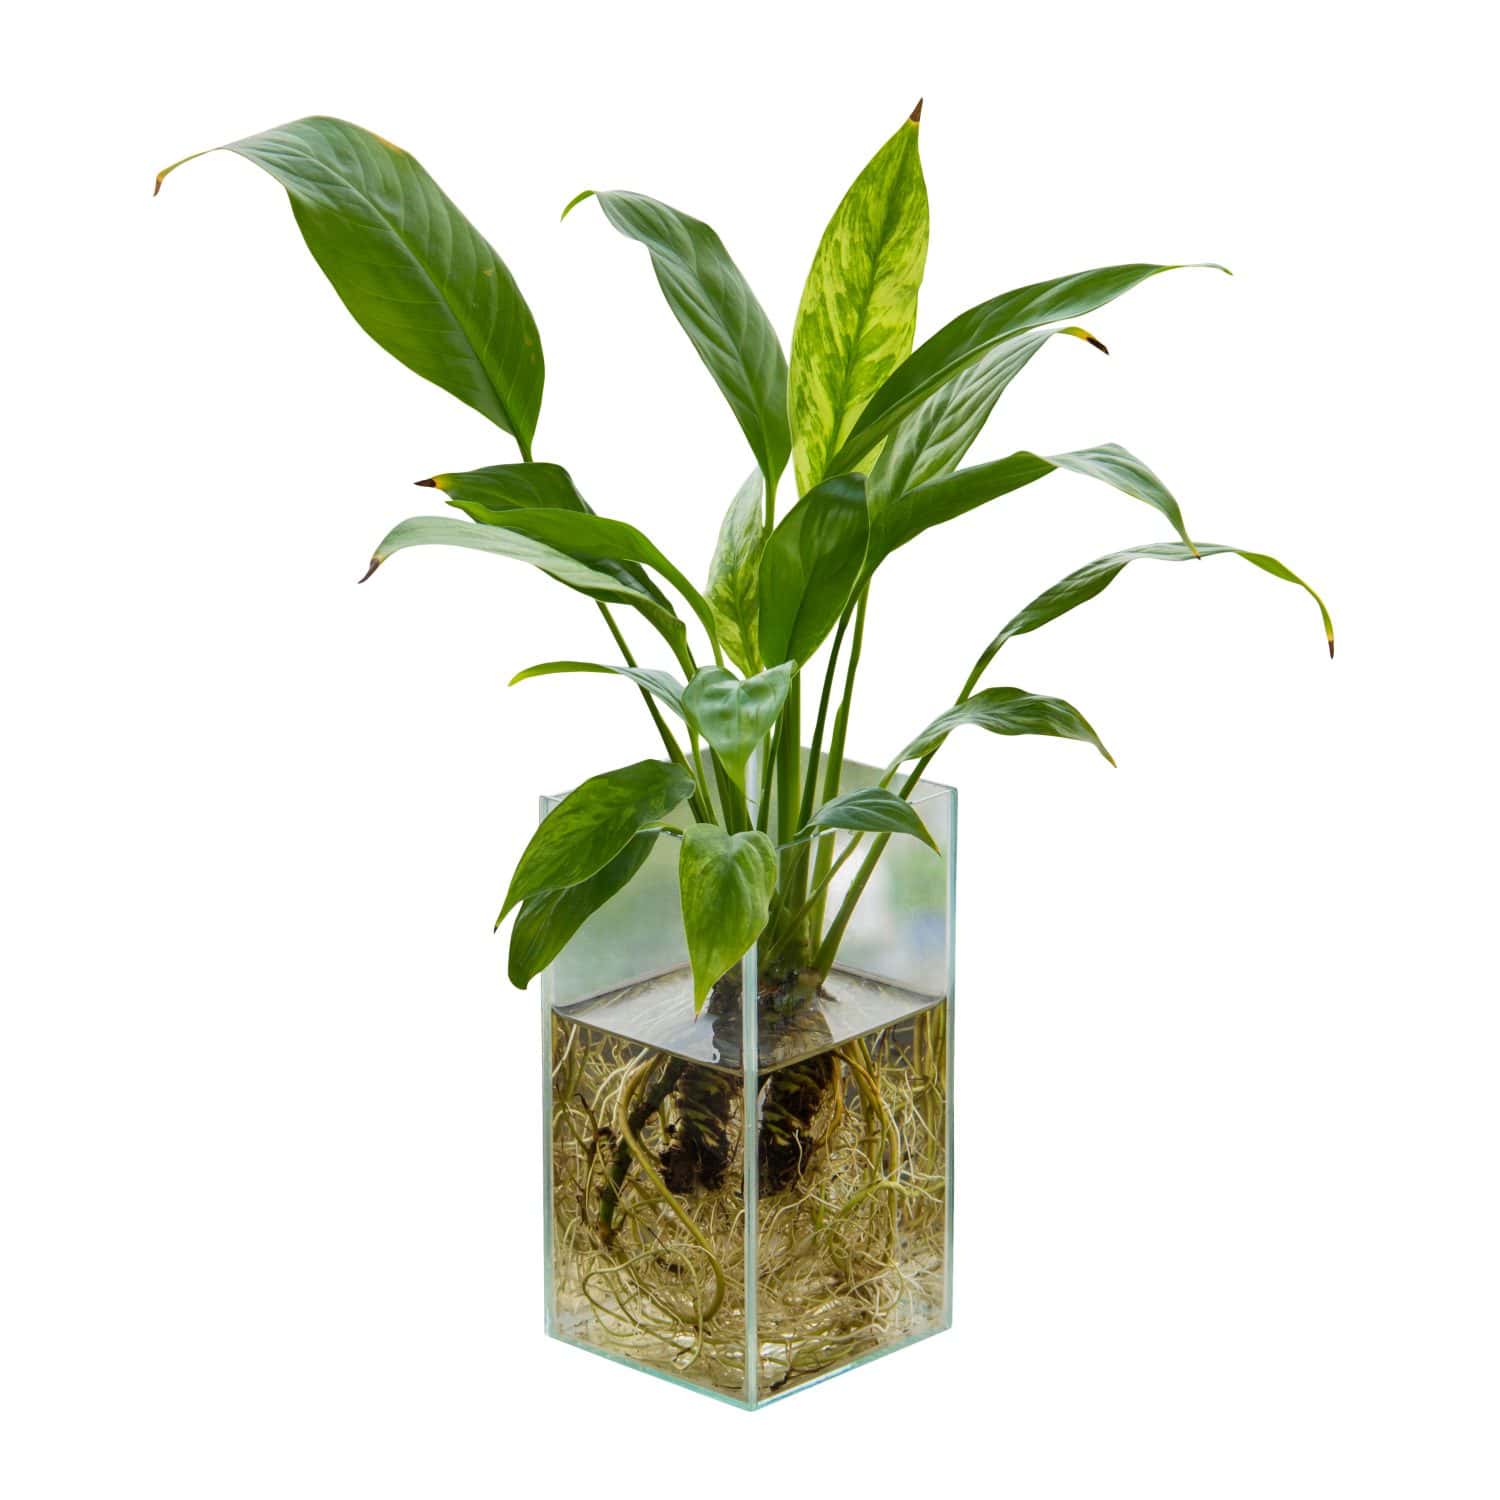 Spathiphyllum or Peace Lily in the glass vase